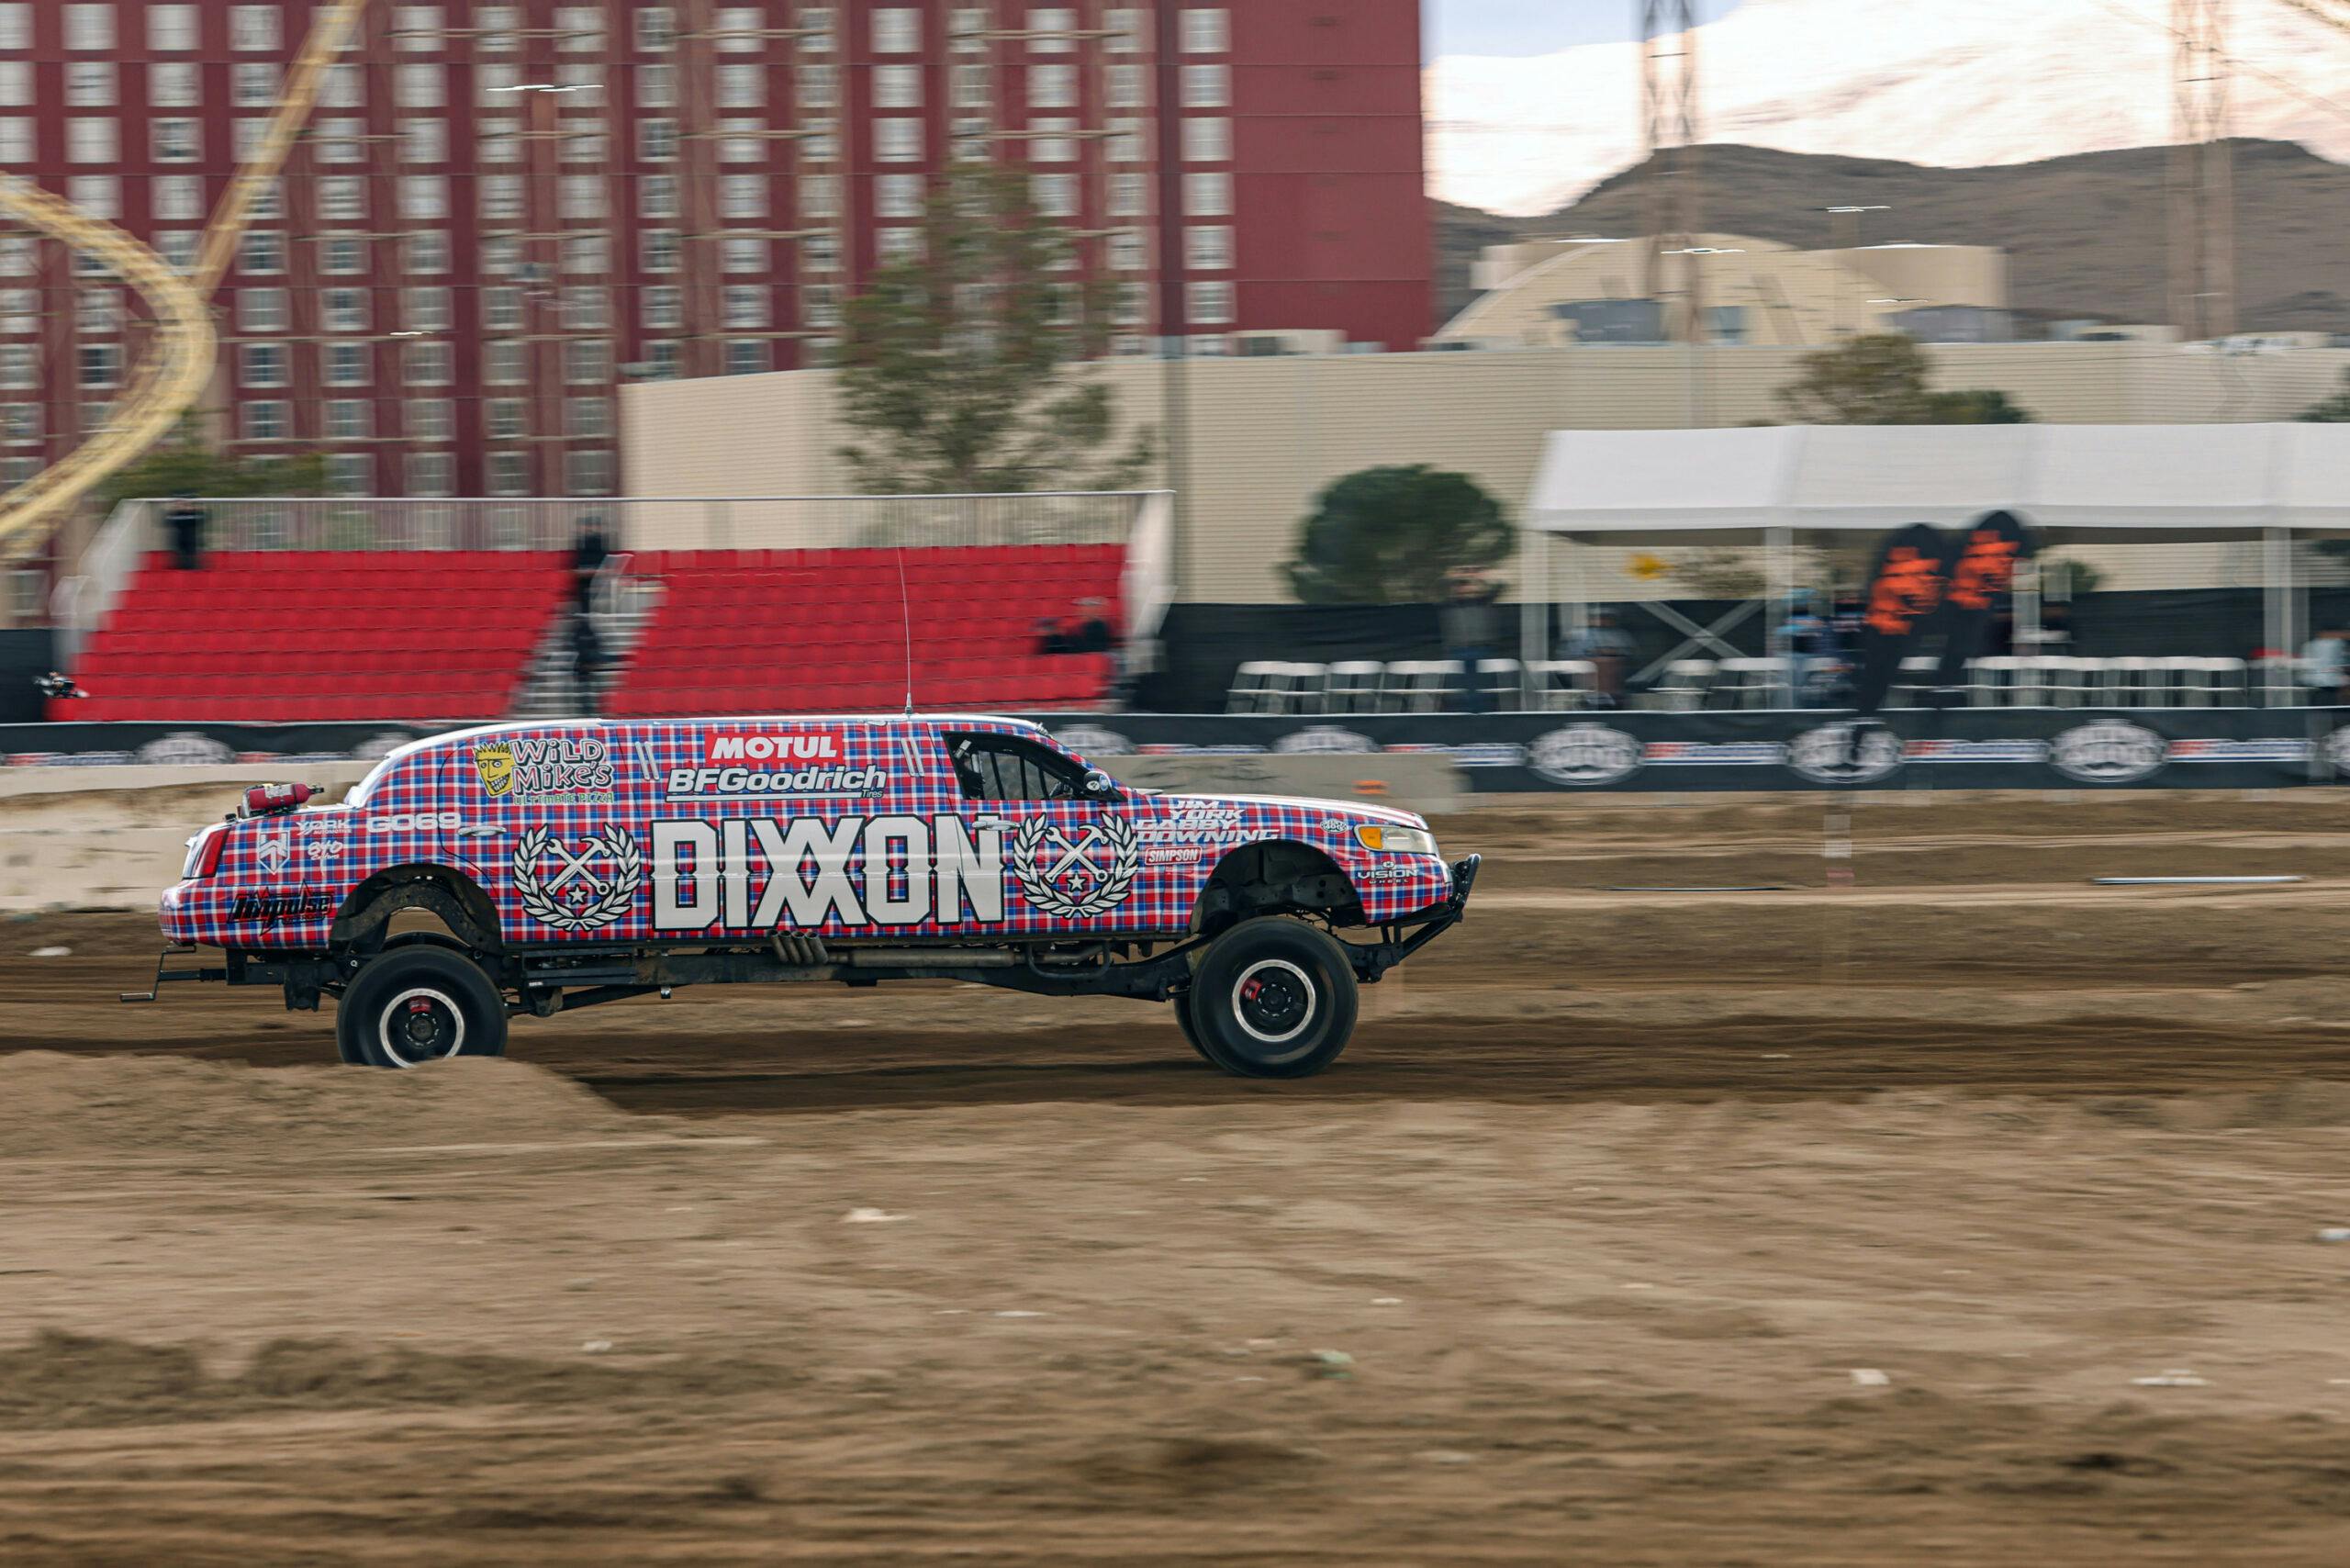 Mint 400 Lincoln Limo action